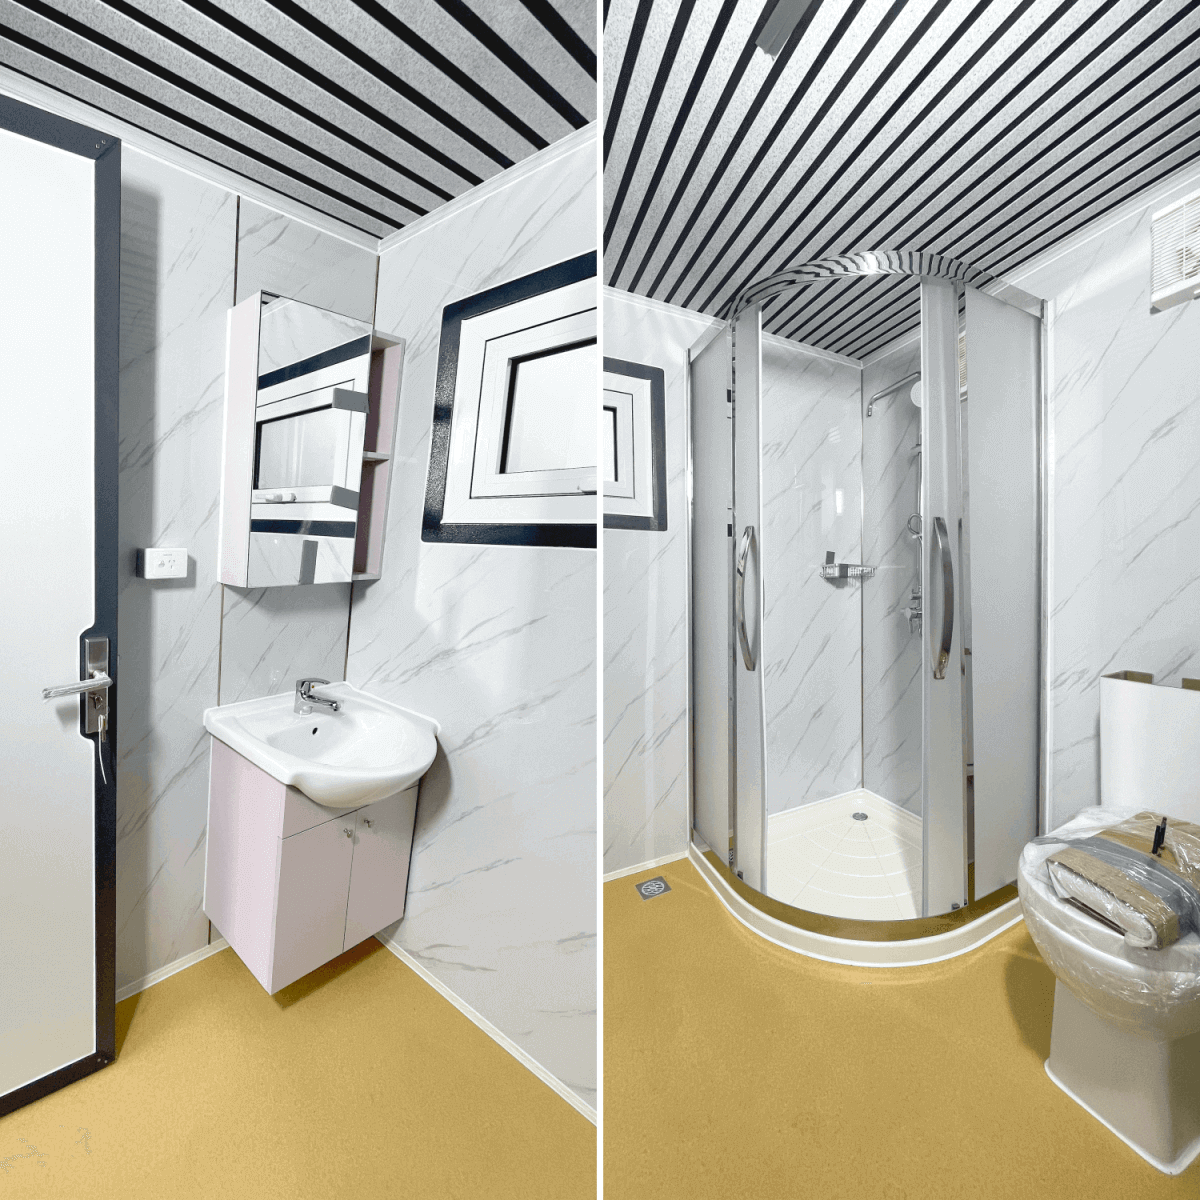 [AS-IS] Portable Toilet with Fan-shaped Door Shower